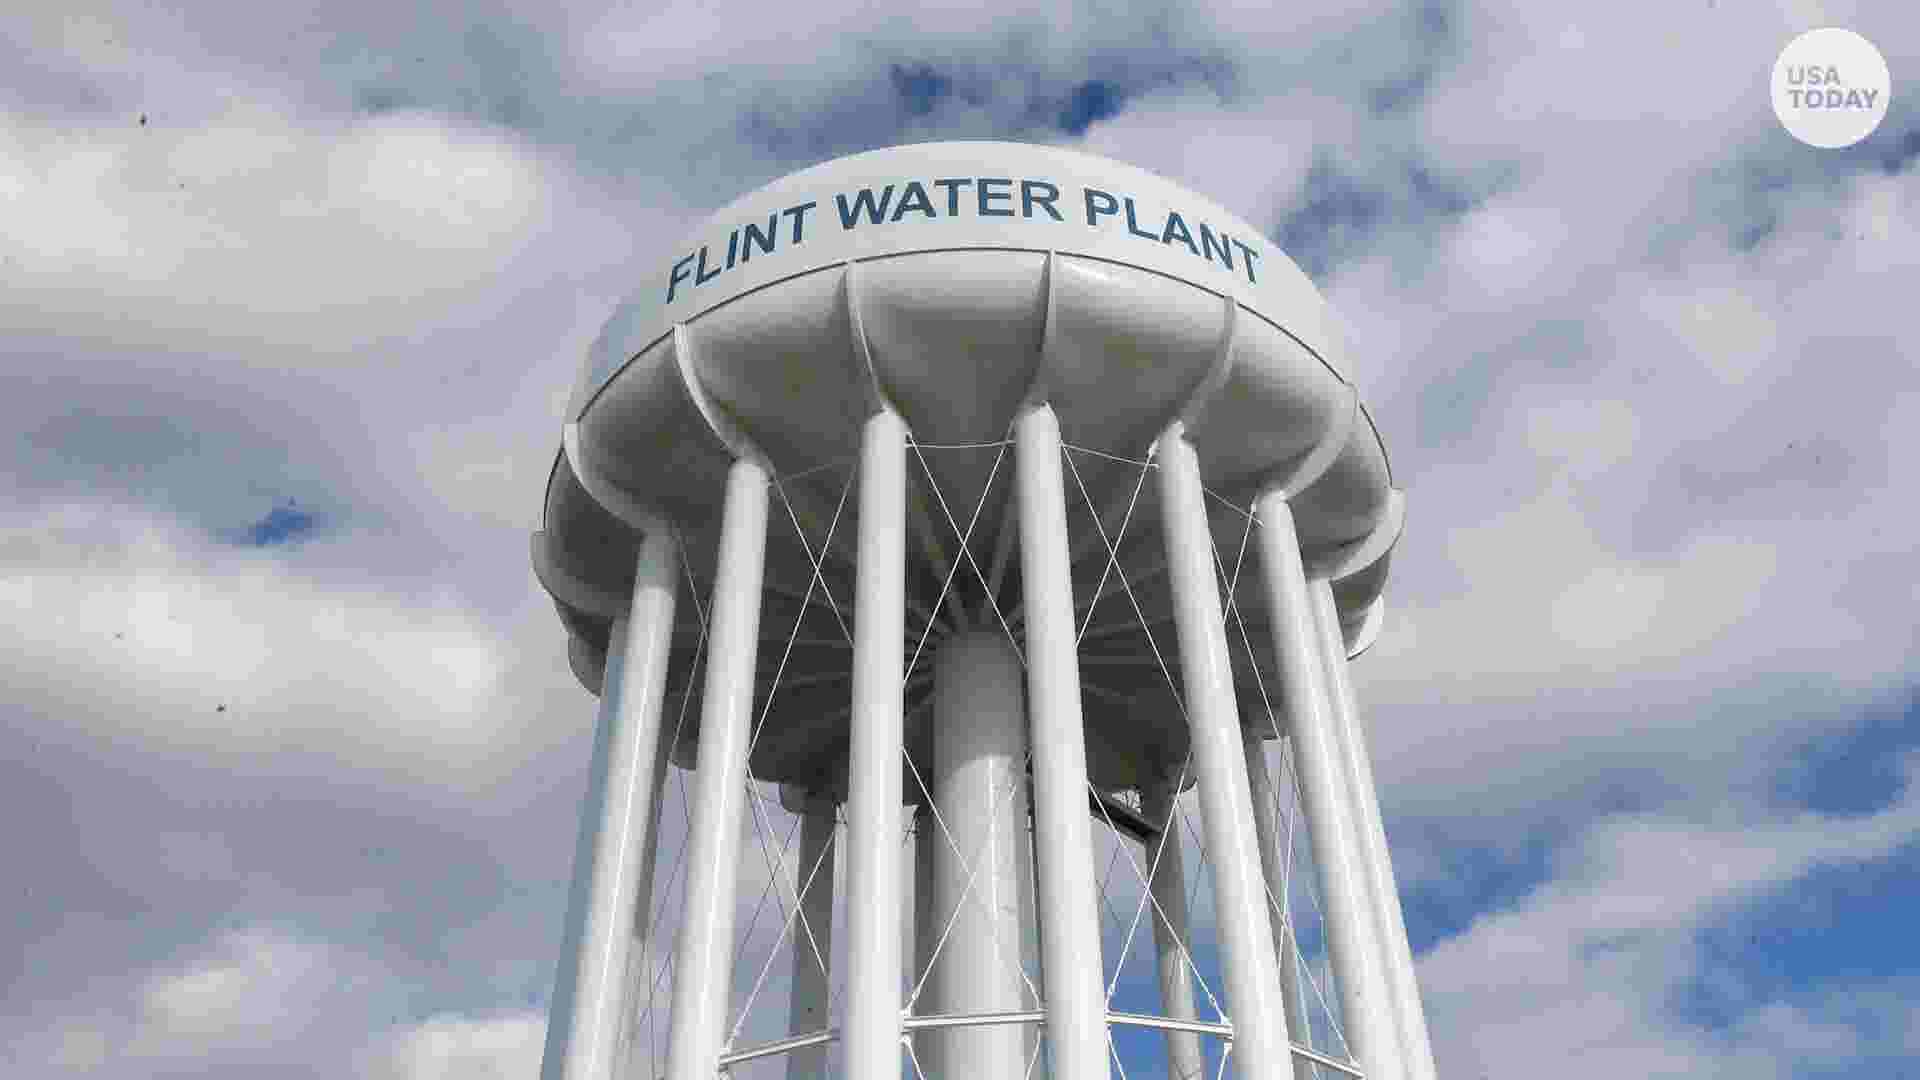 Michigan to pay $600M in Flint water crisis settlement, residents eligible for payments - MSN Money